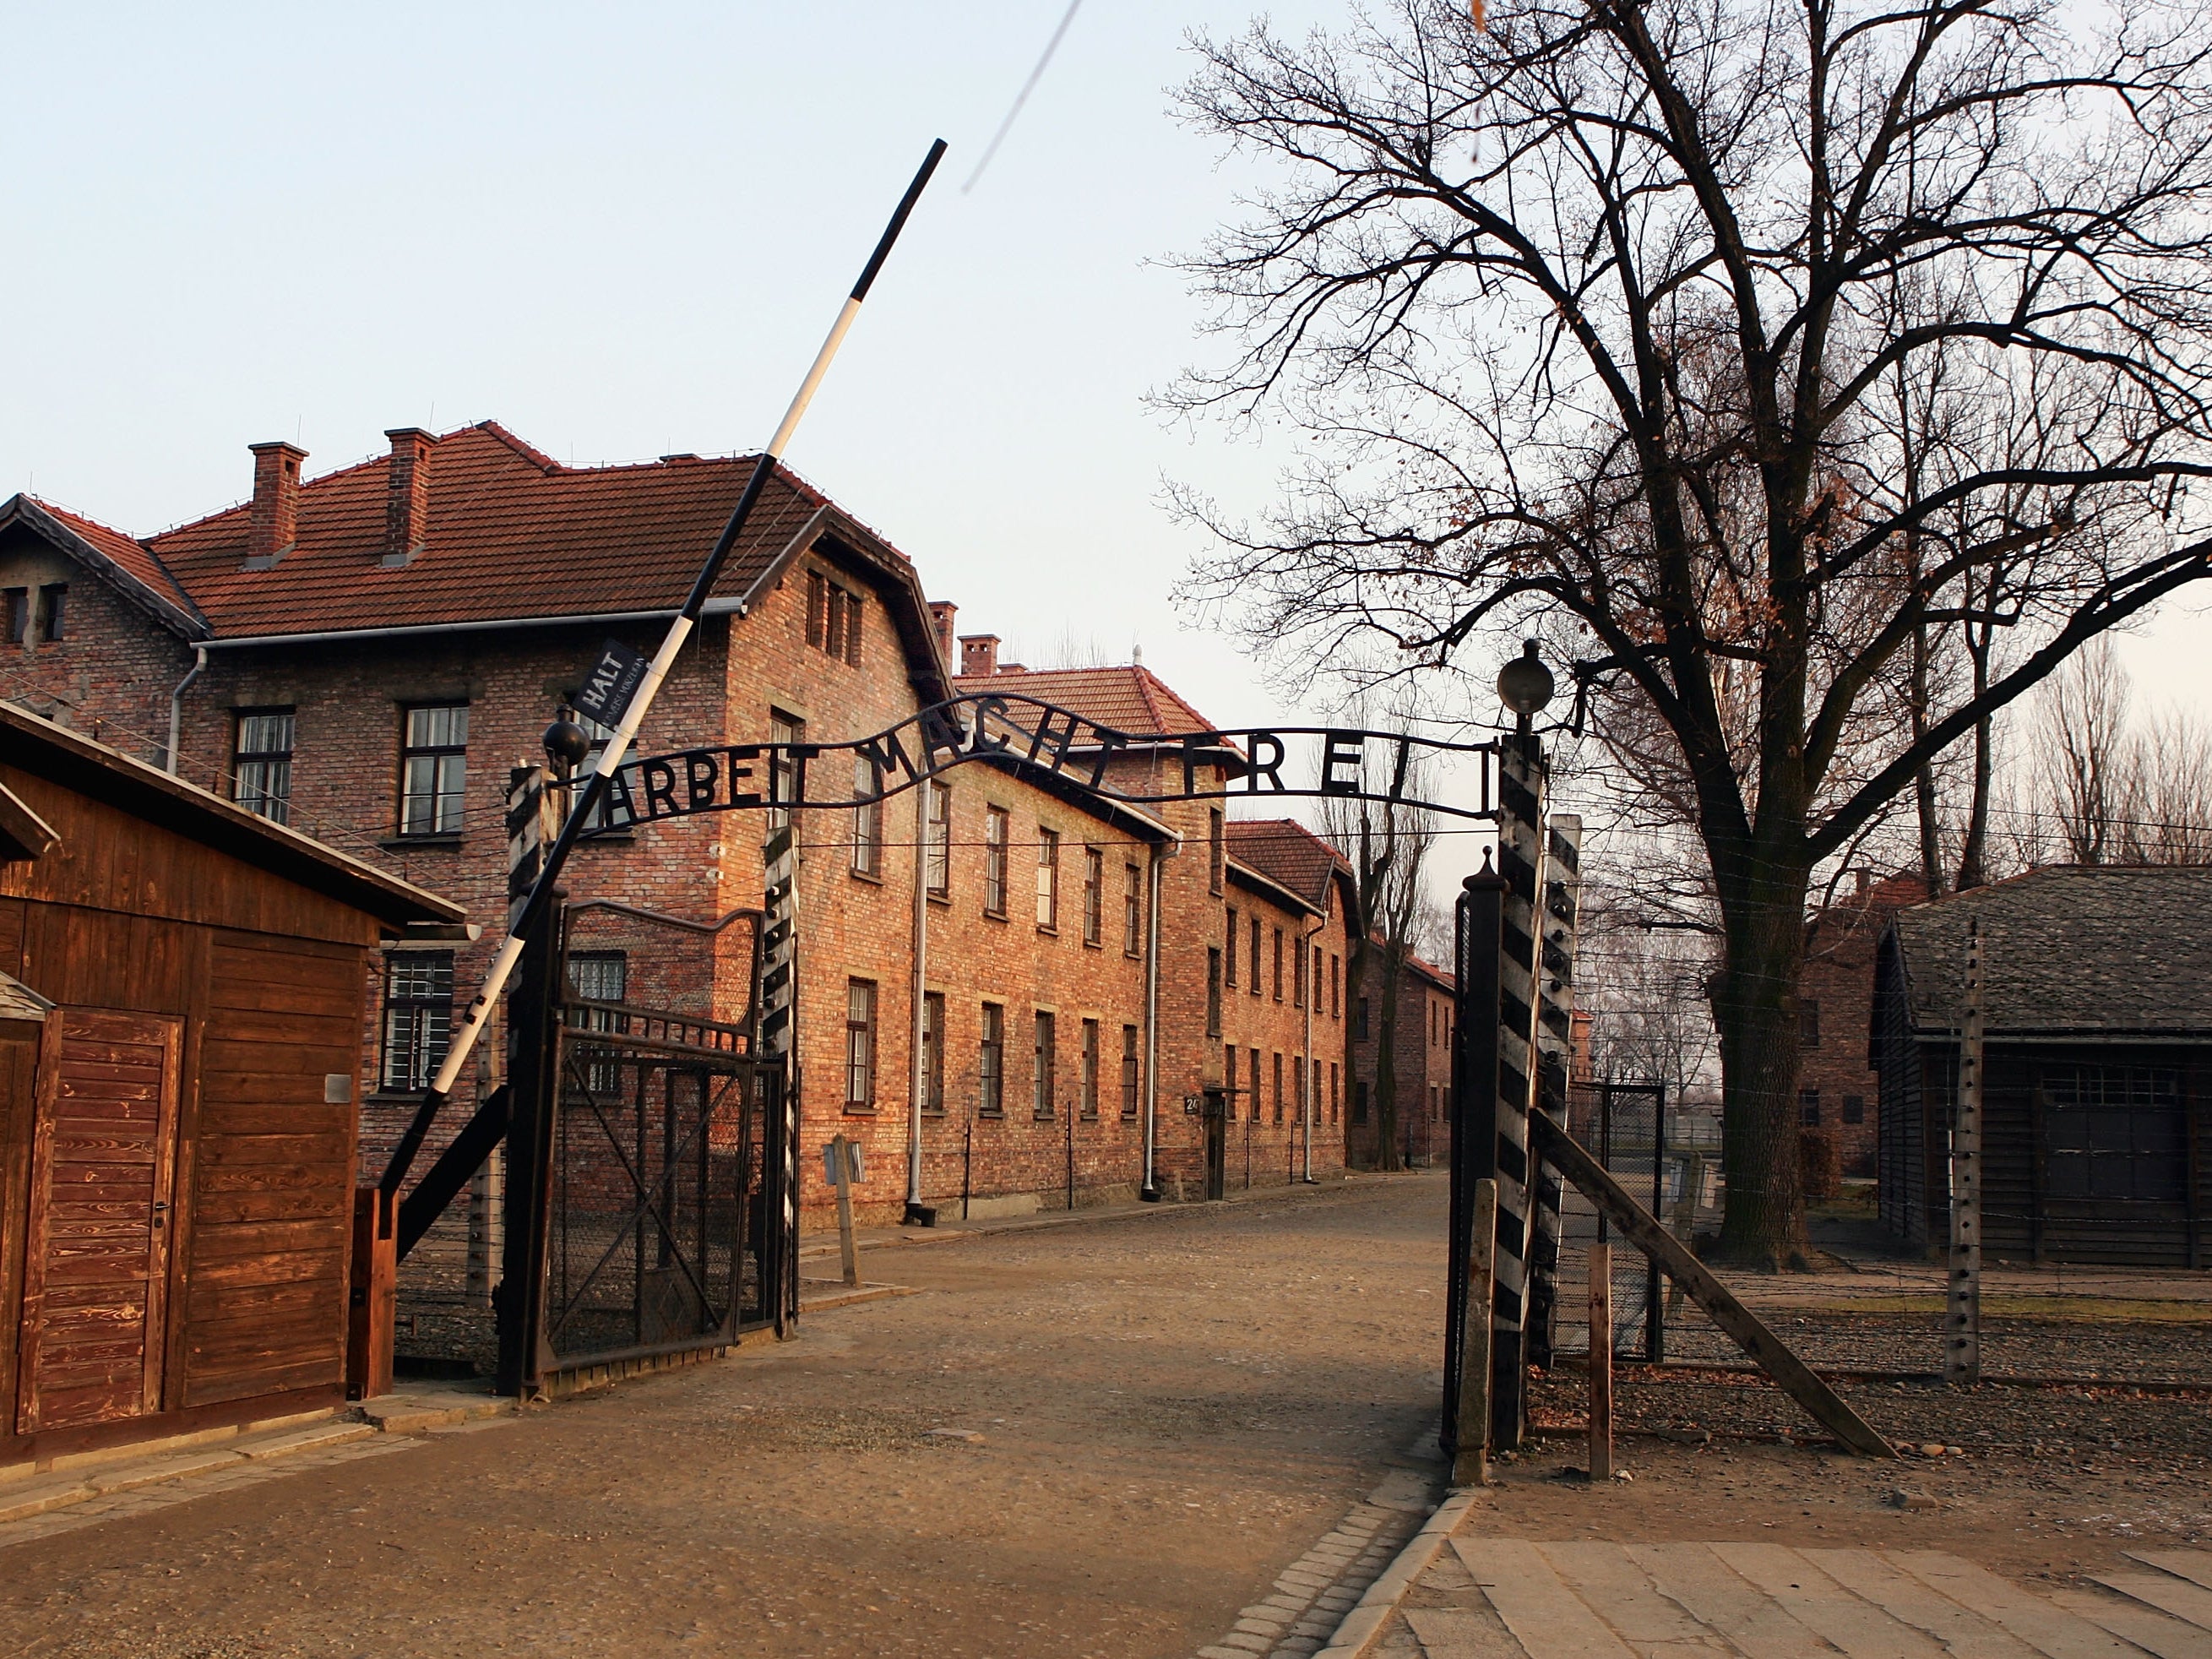 A view showing the entrance gates to Auschwitz with the words ‘Arbeit Macht Frei'